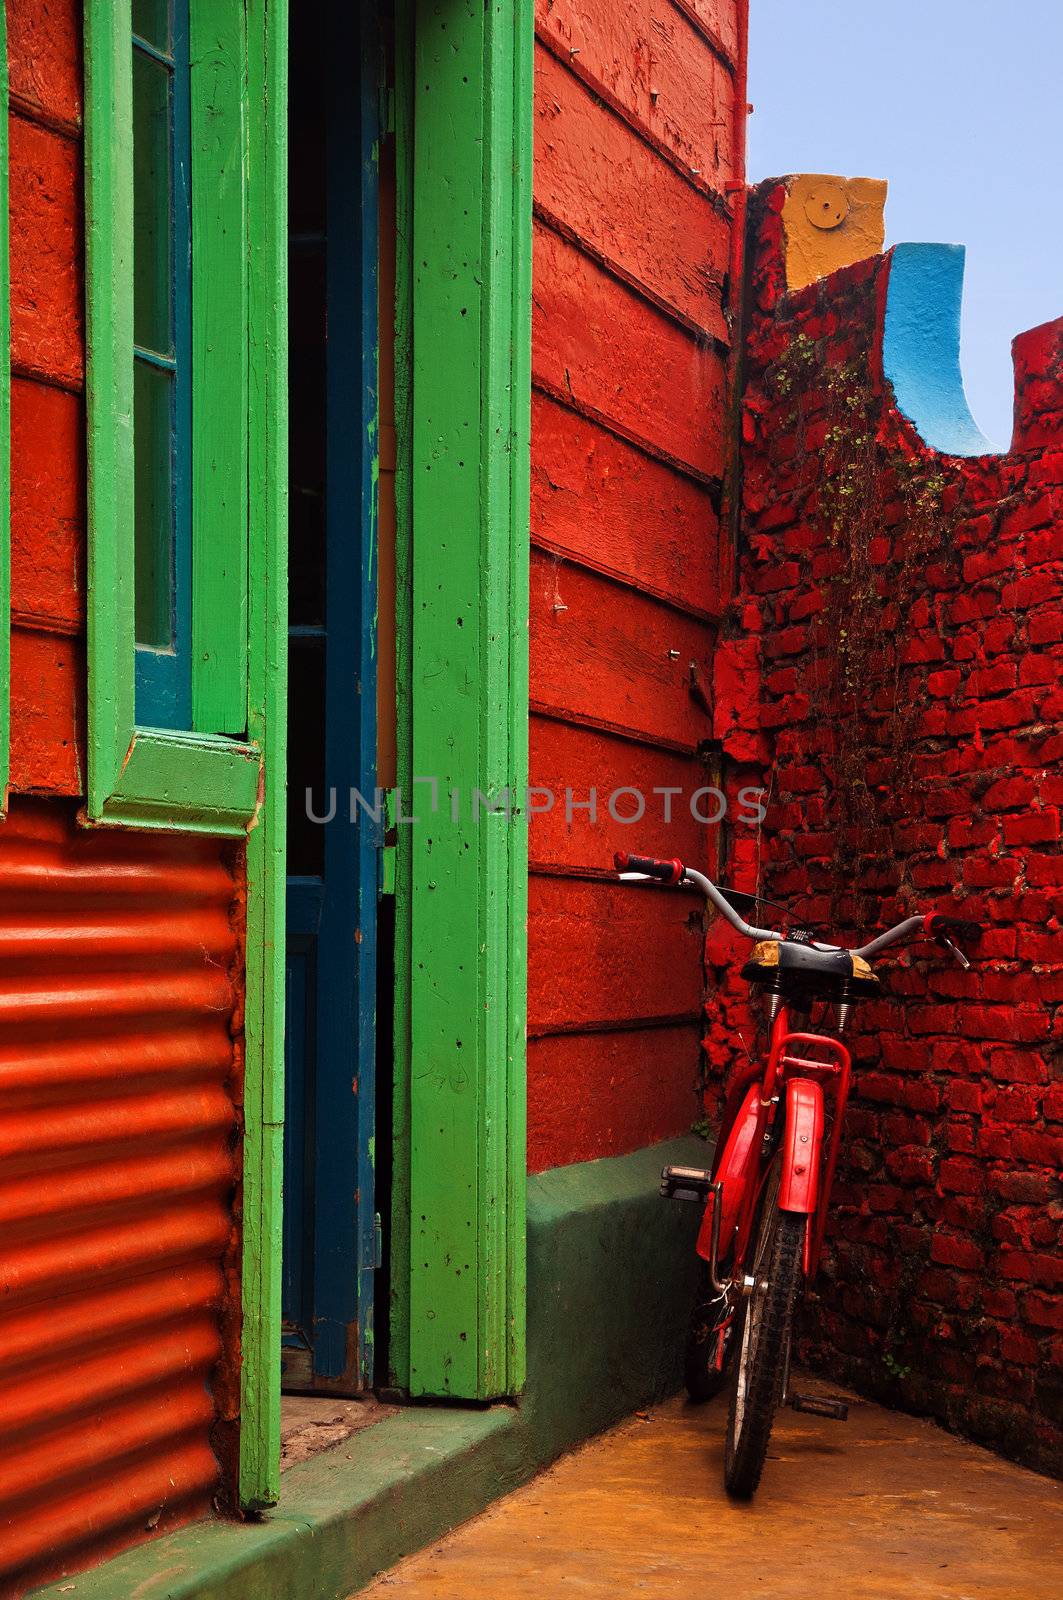 Red Bicycle next to a Red Wall by jkraft5